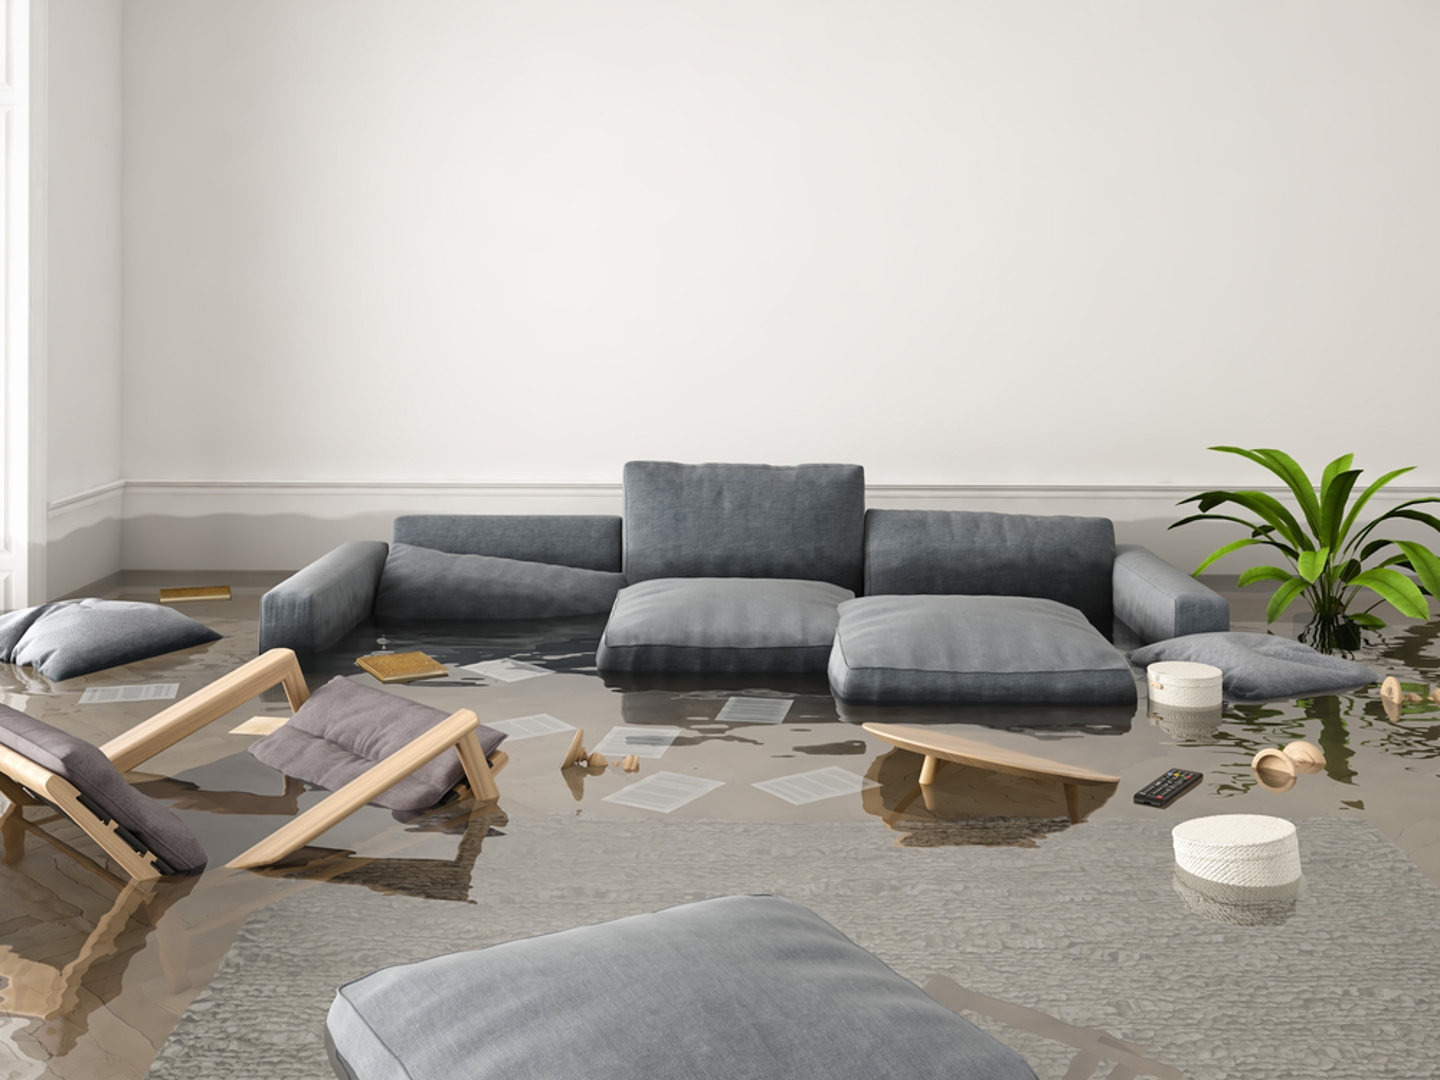 Couch and chair in a flooded living room